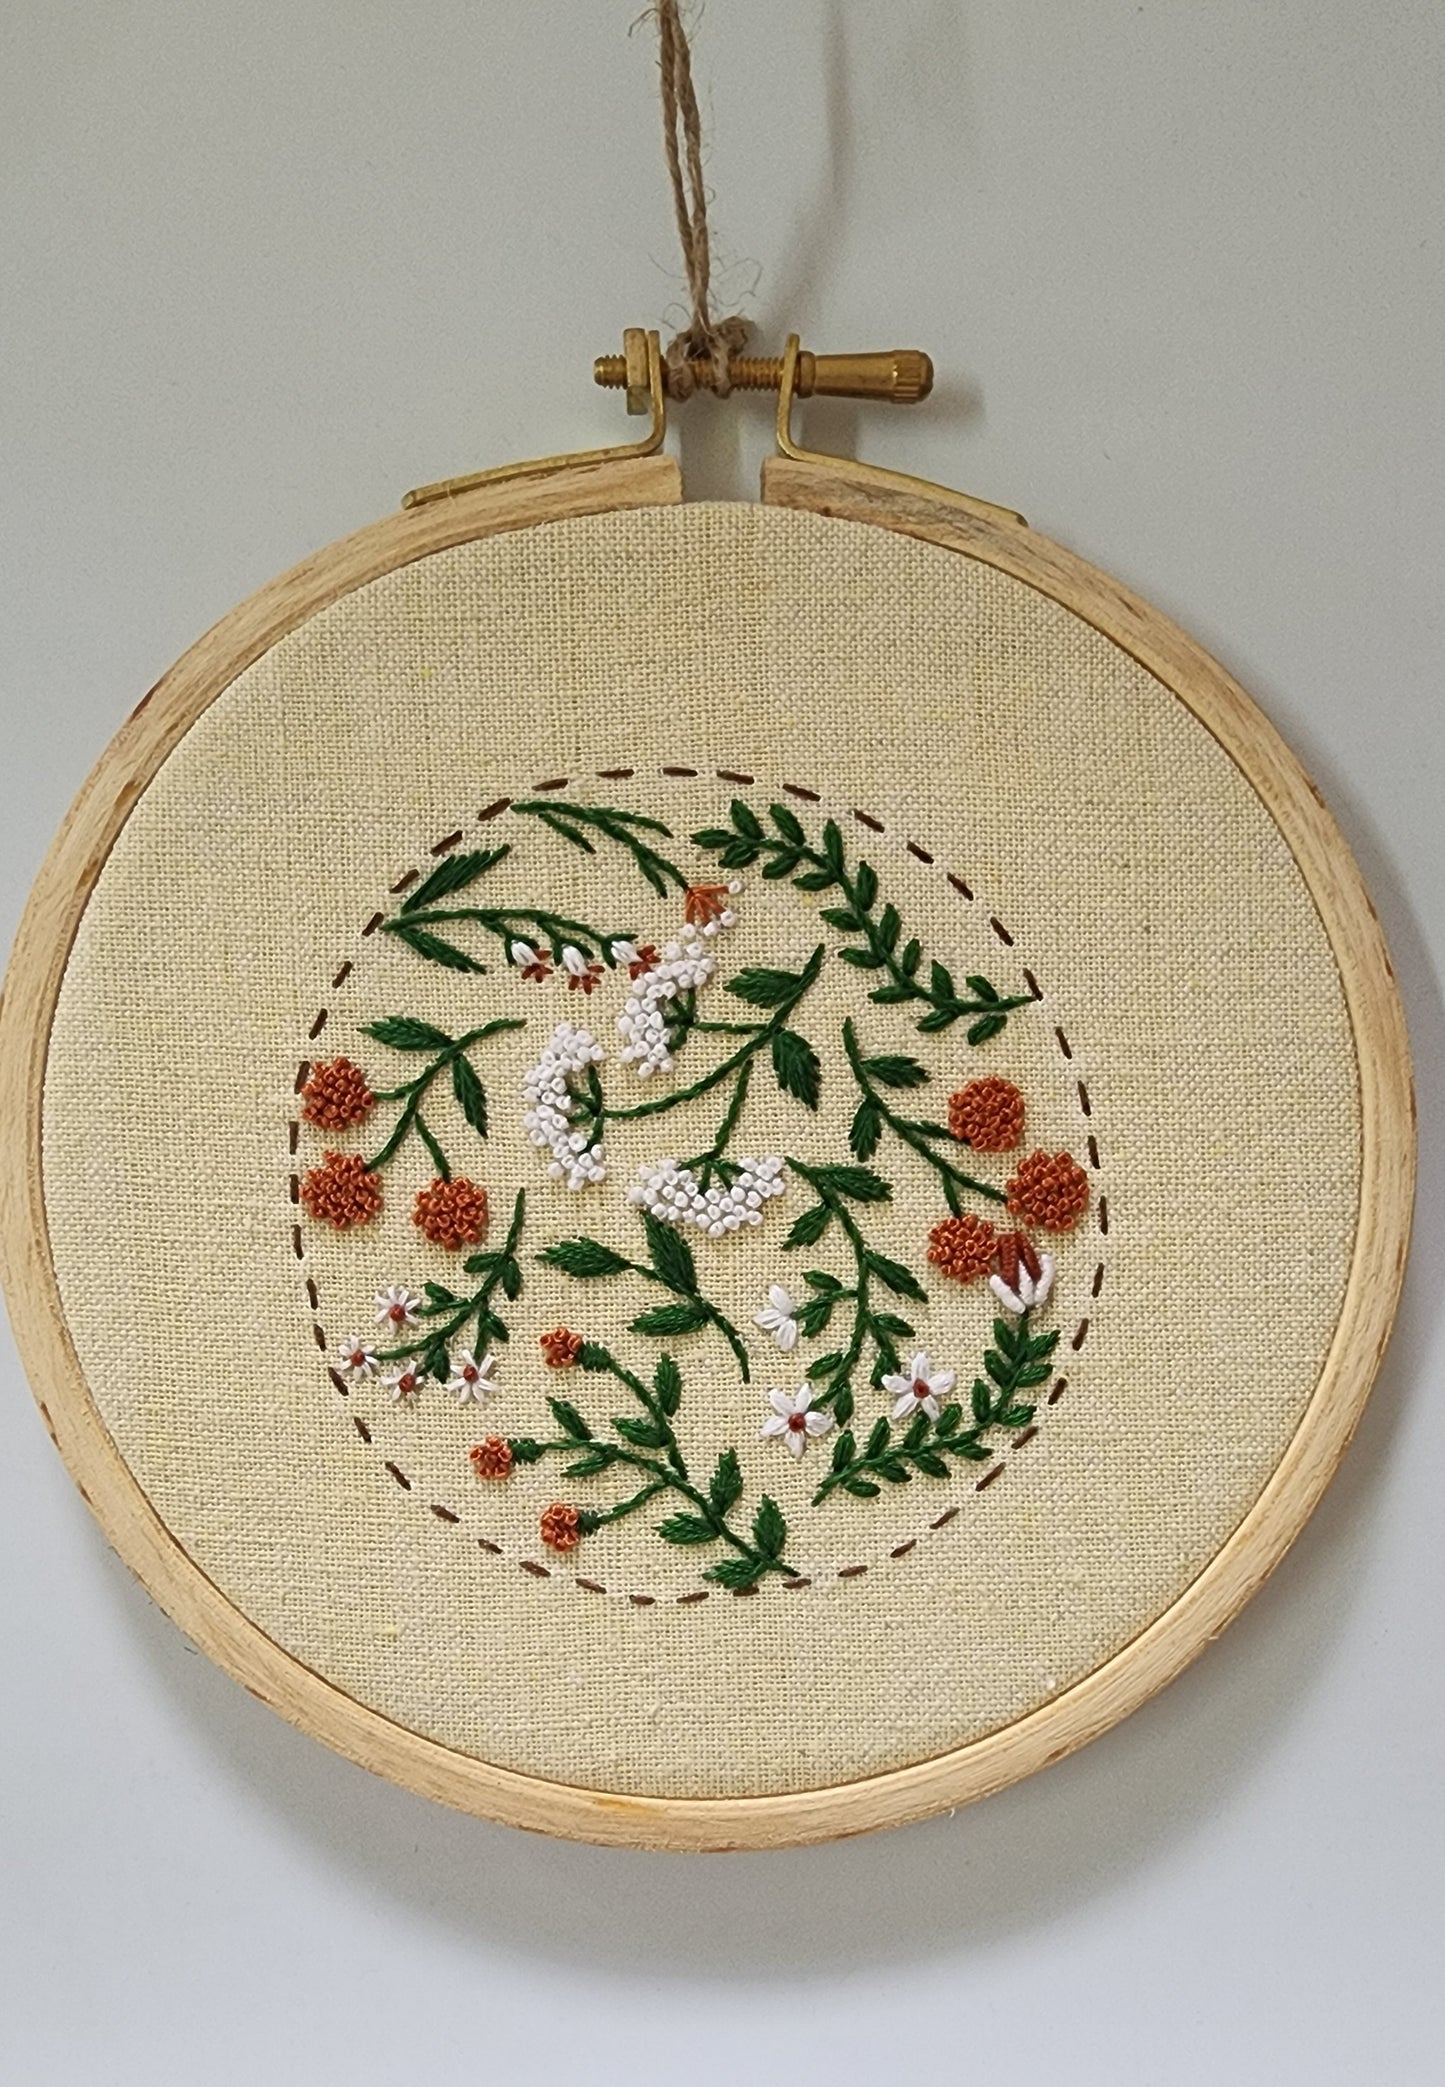 Ikali - Flower Circle - Hand-embroidered Wall-hanging Hoop